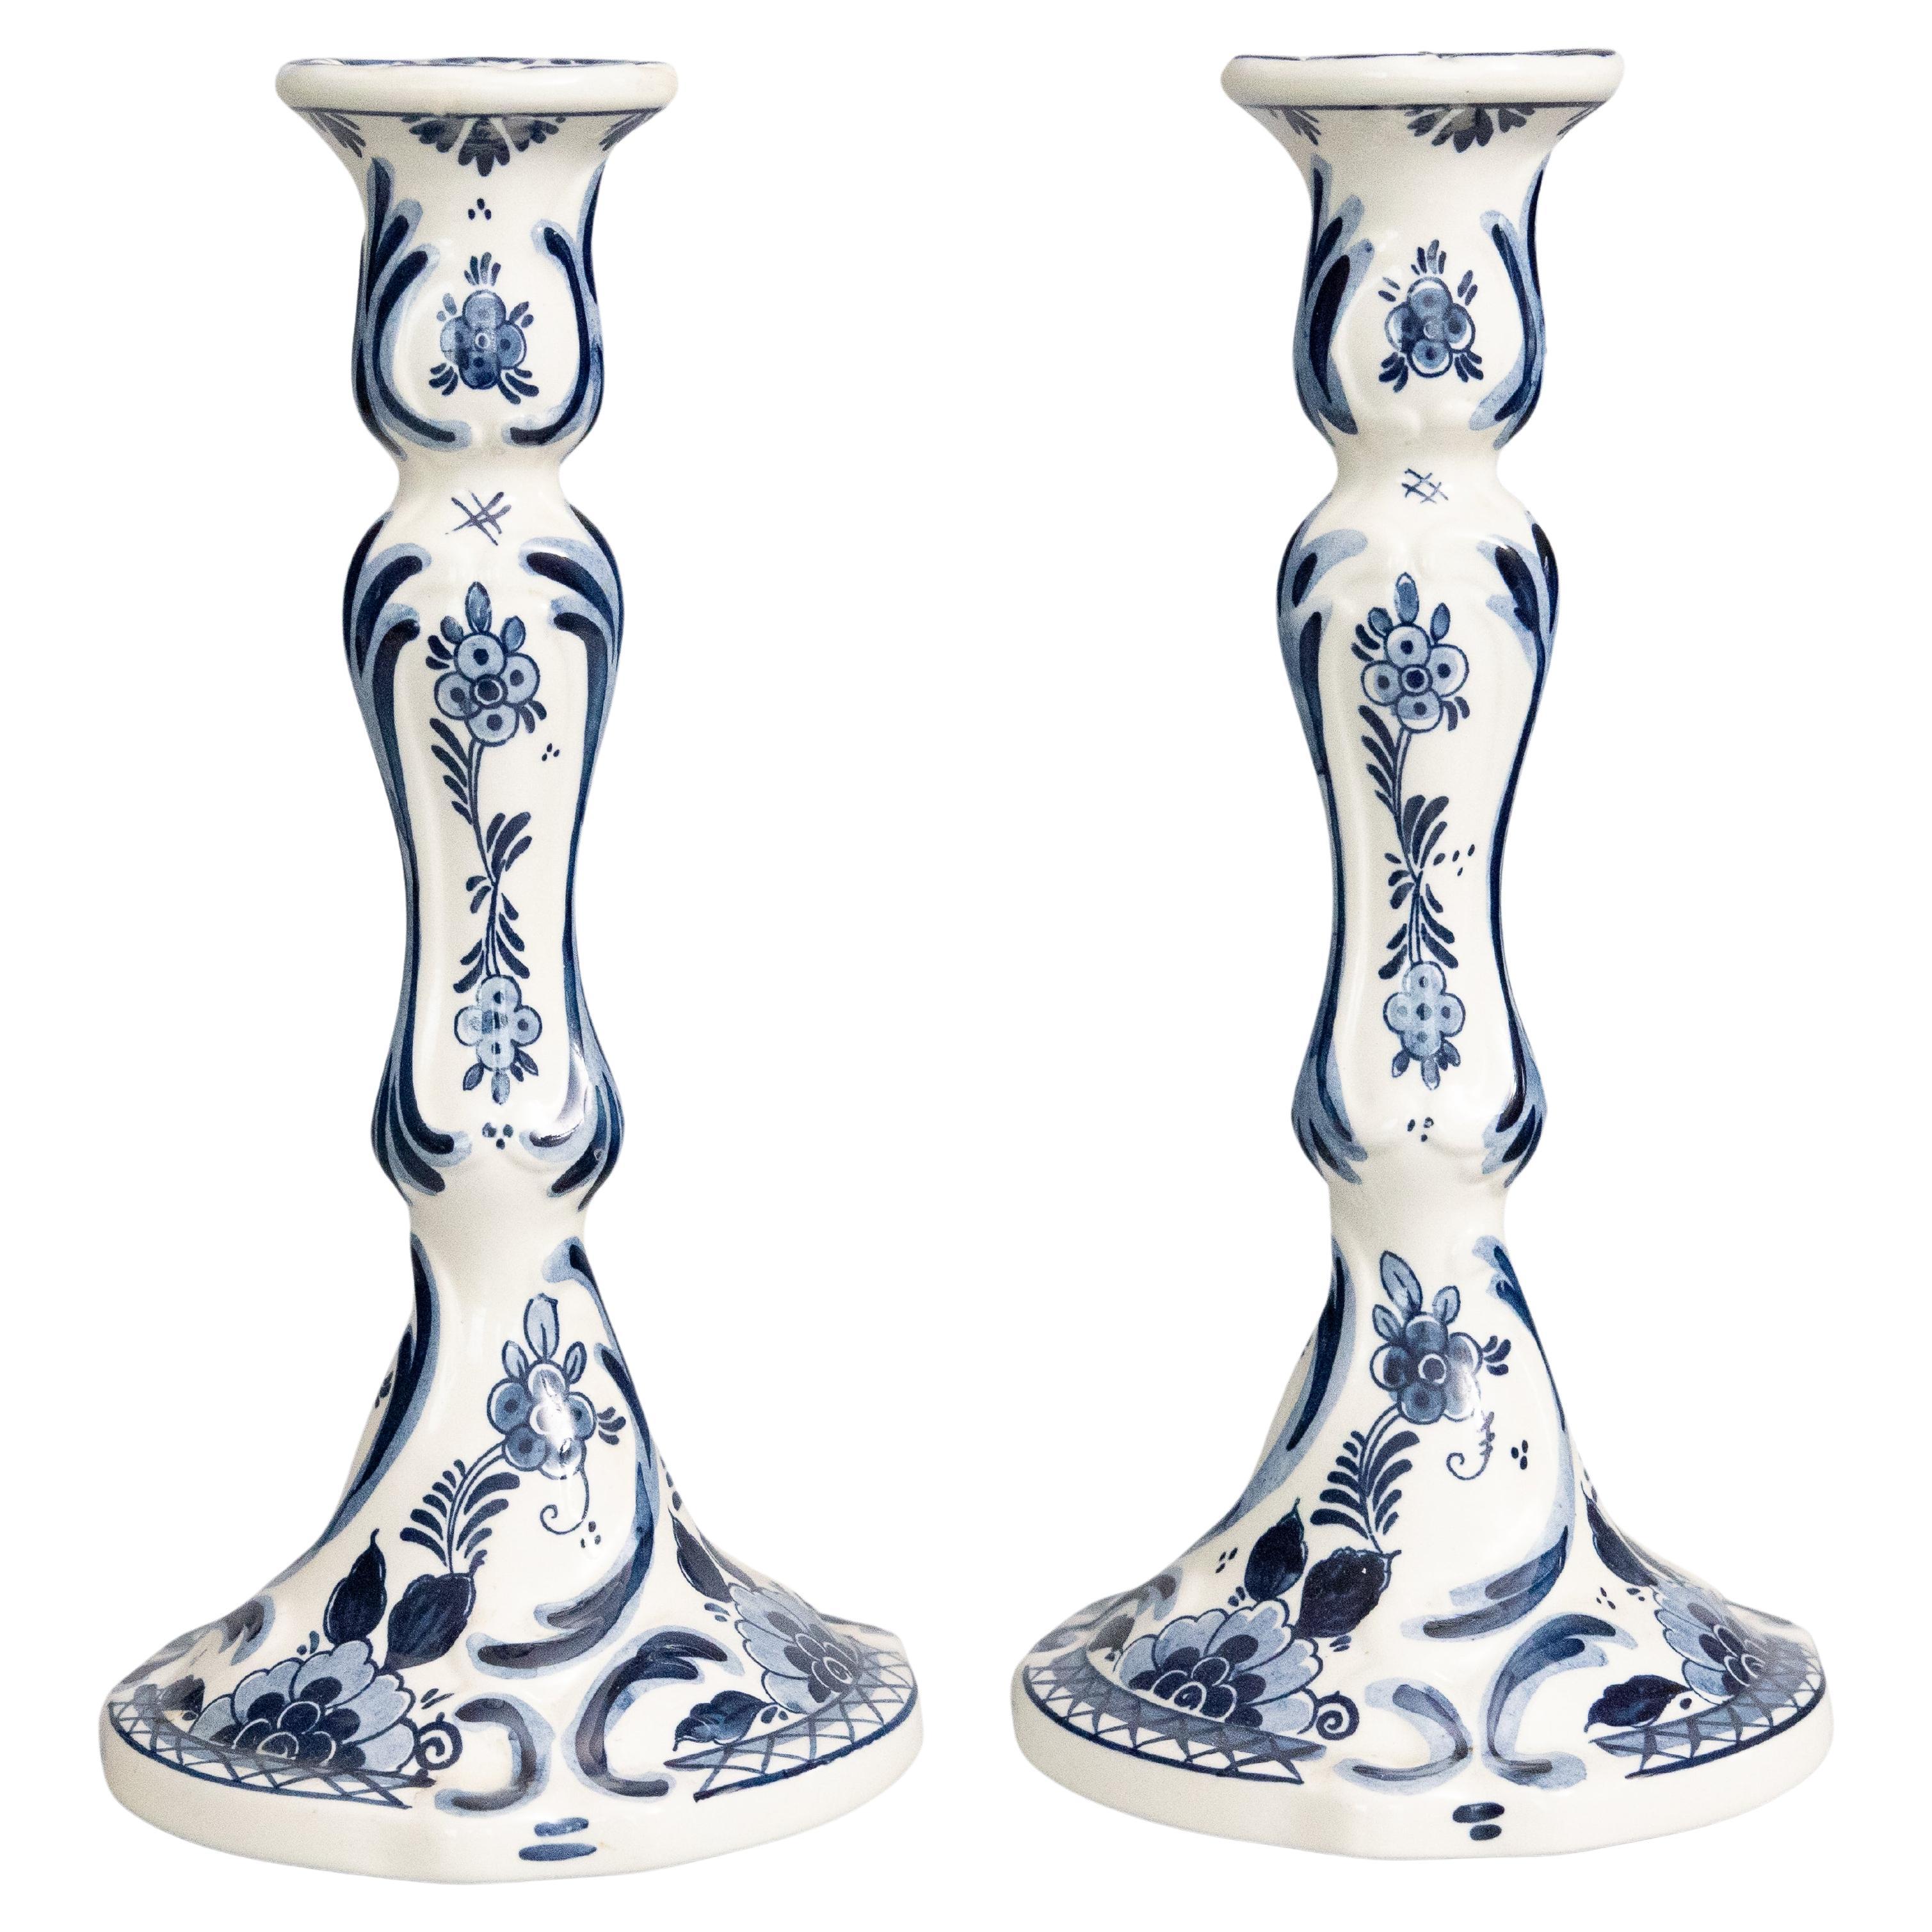 Pair of Tall Vintage Dutch Delft Faience Floral Candlesticks